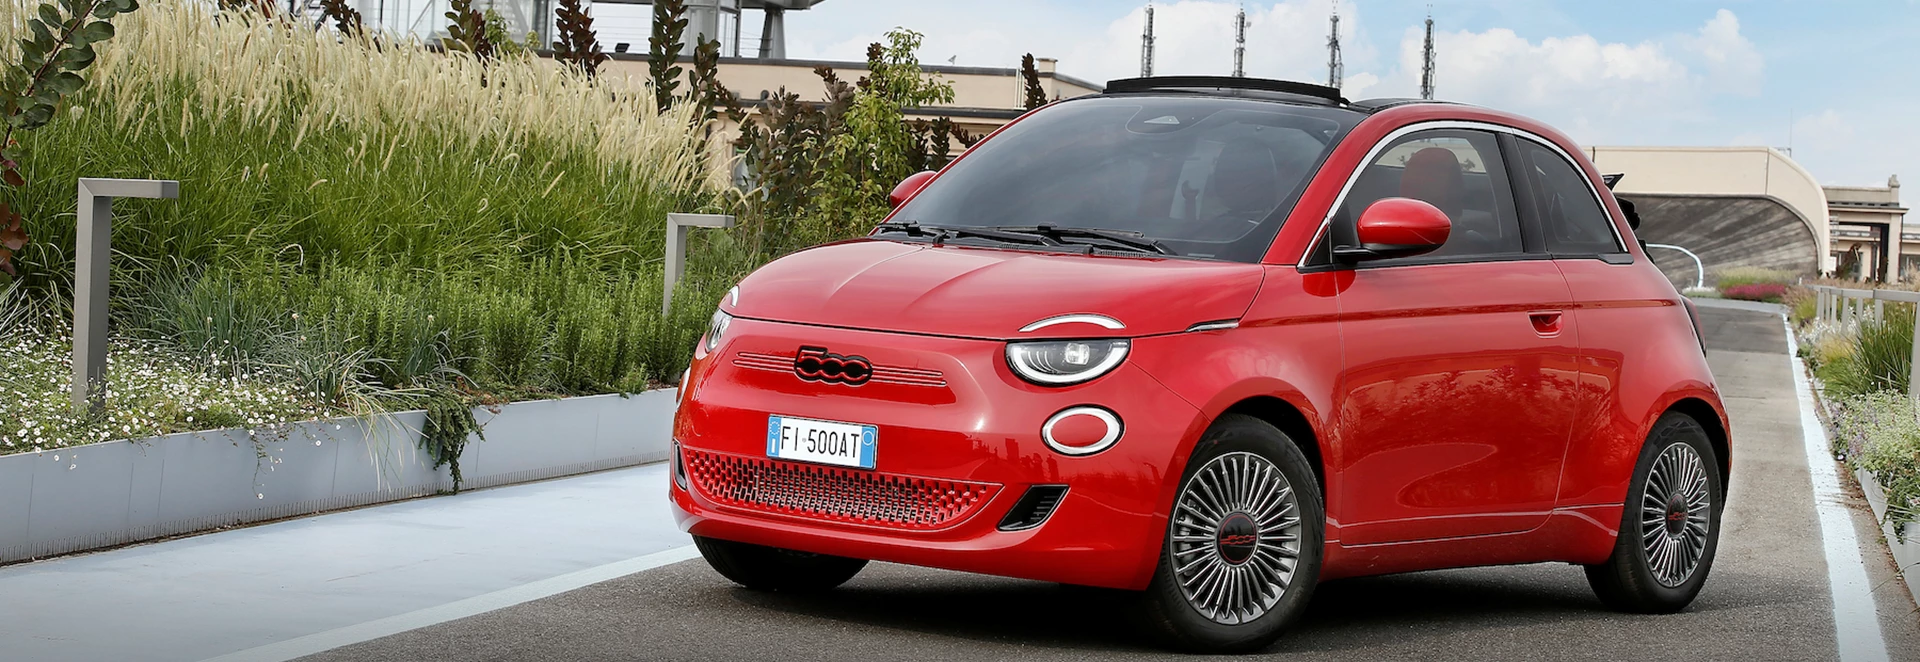 Fiat establishes new partnership through (500) RED special edition 